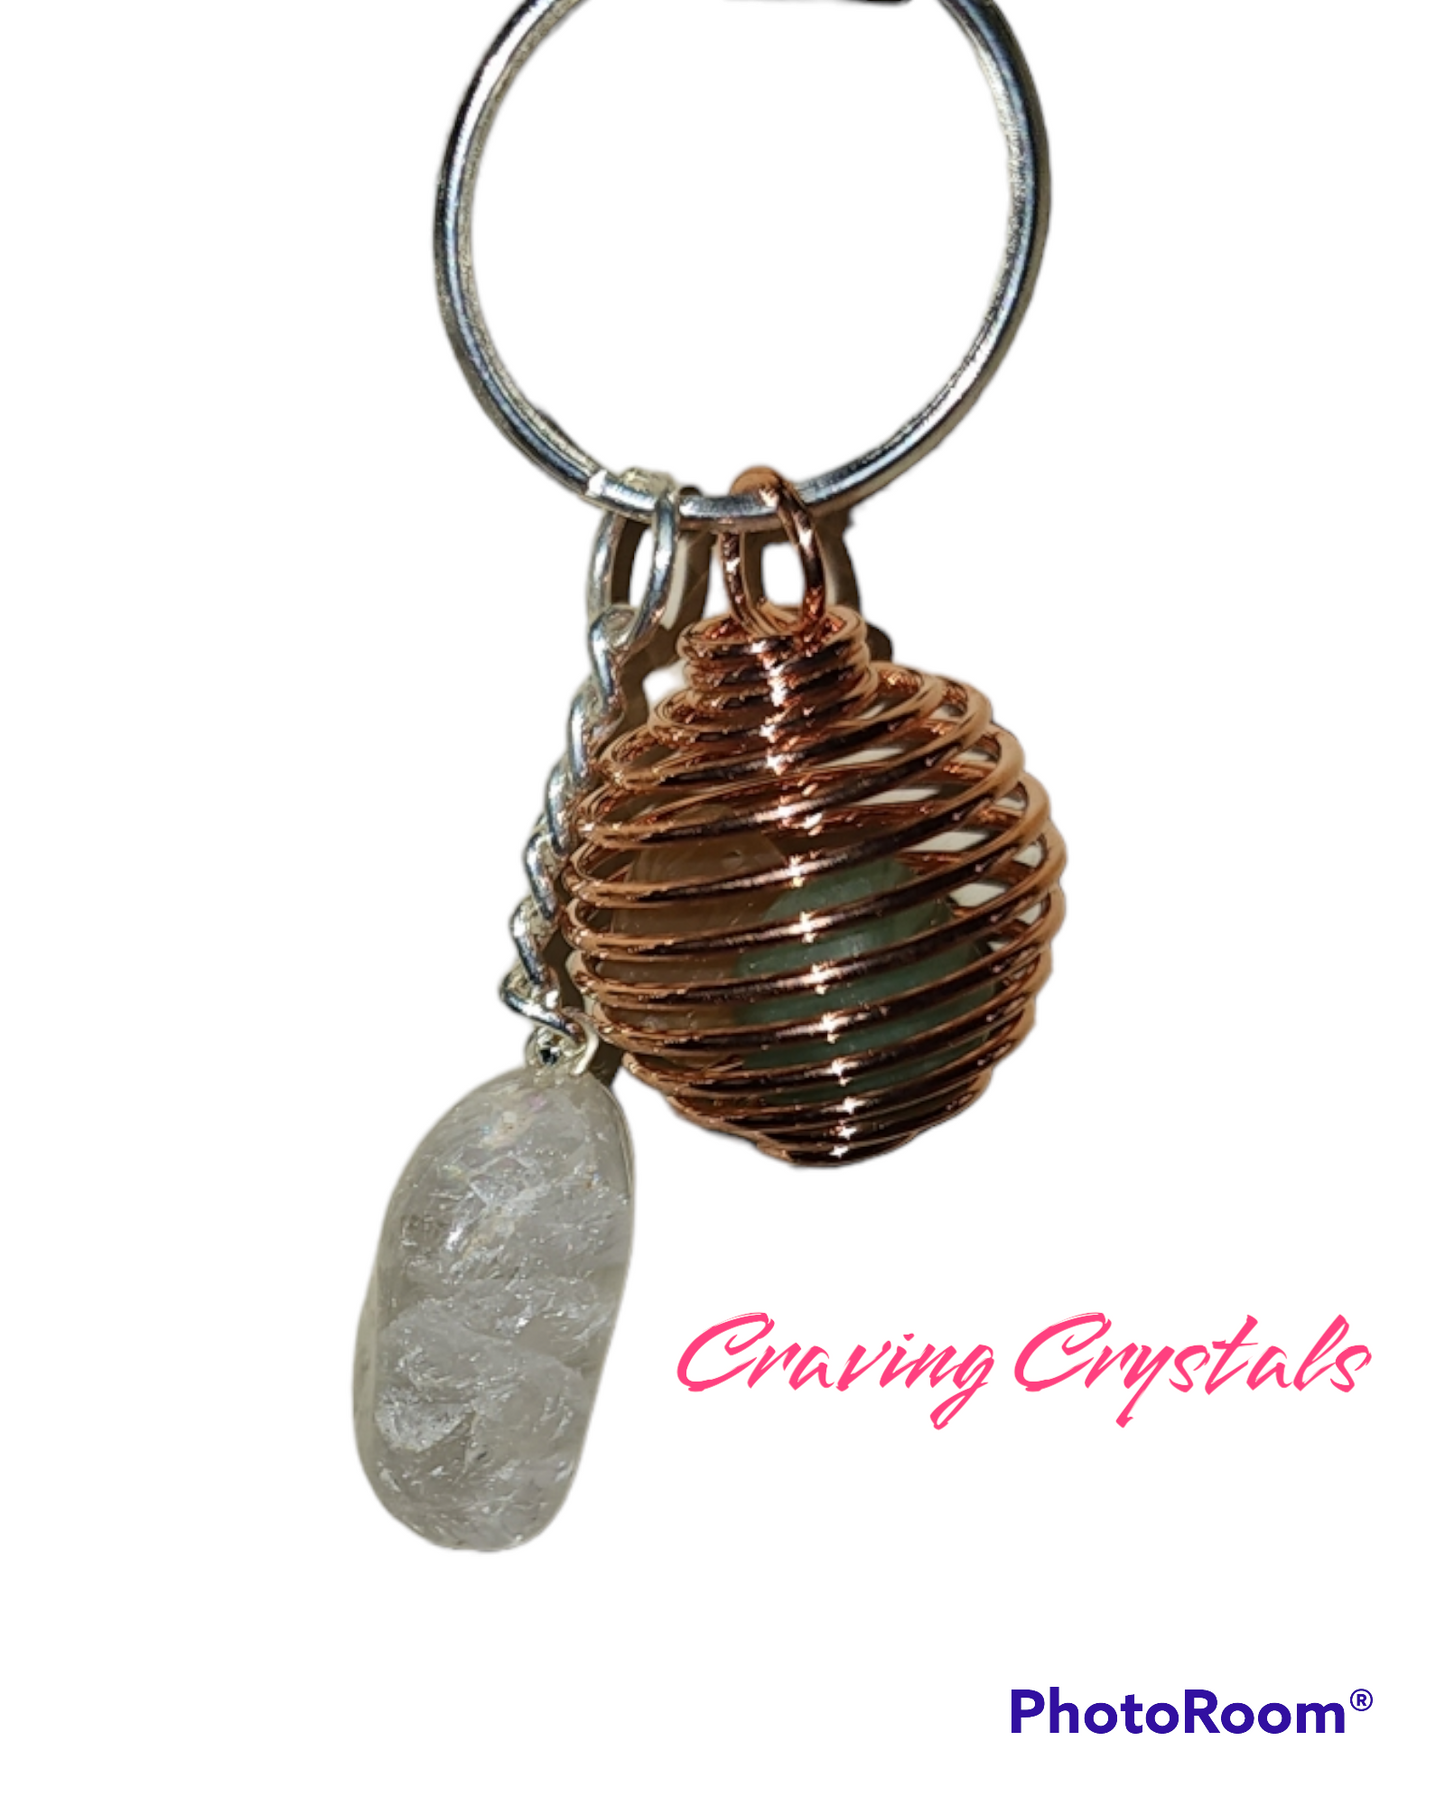 Clear Quartz Tumbled Crystal Keychain w/2 Stones in Copper Cage| Reiki Infused